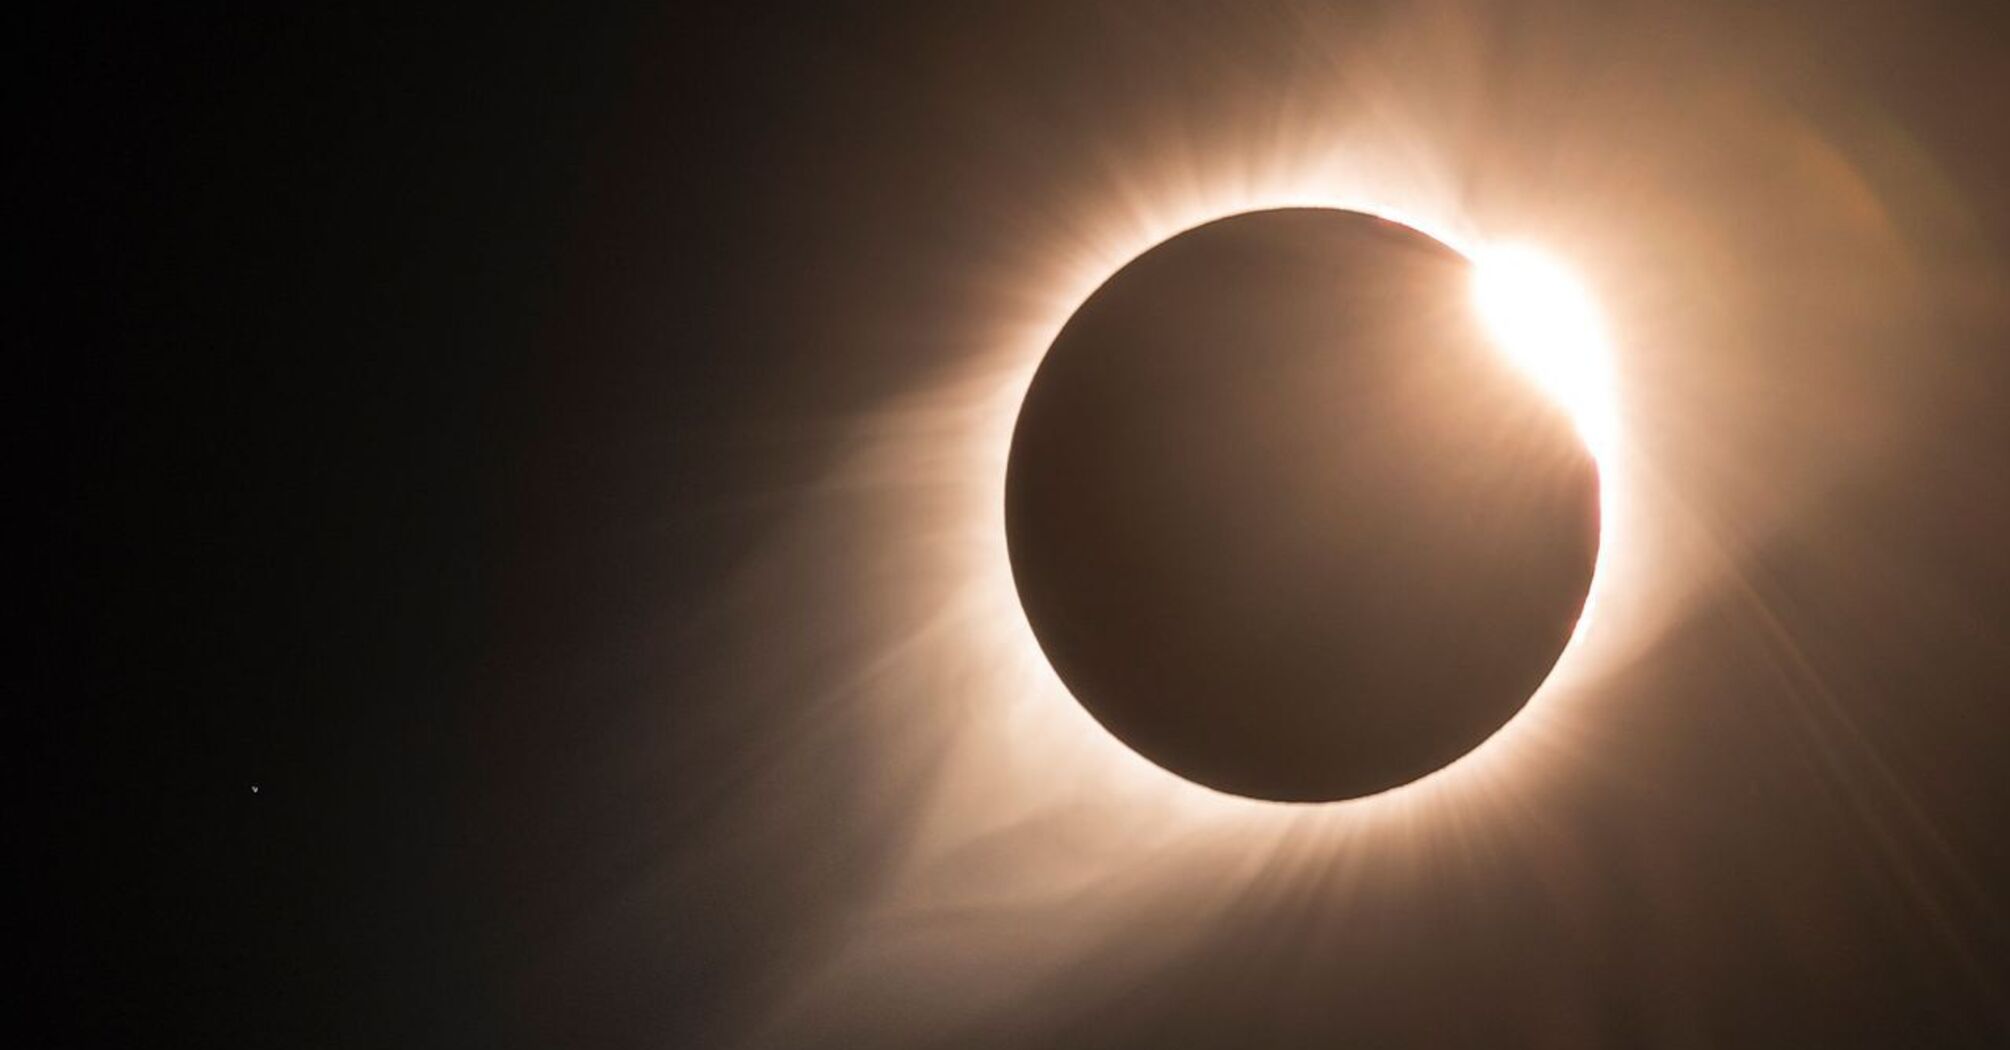 Solar eclipse affects people's psyche